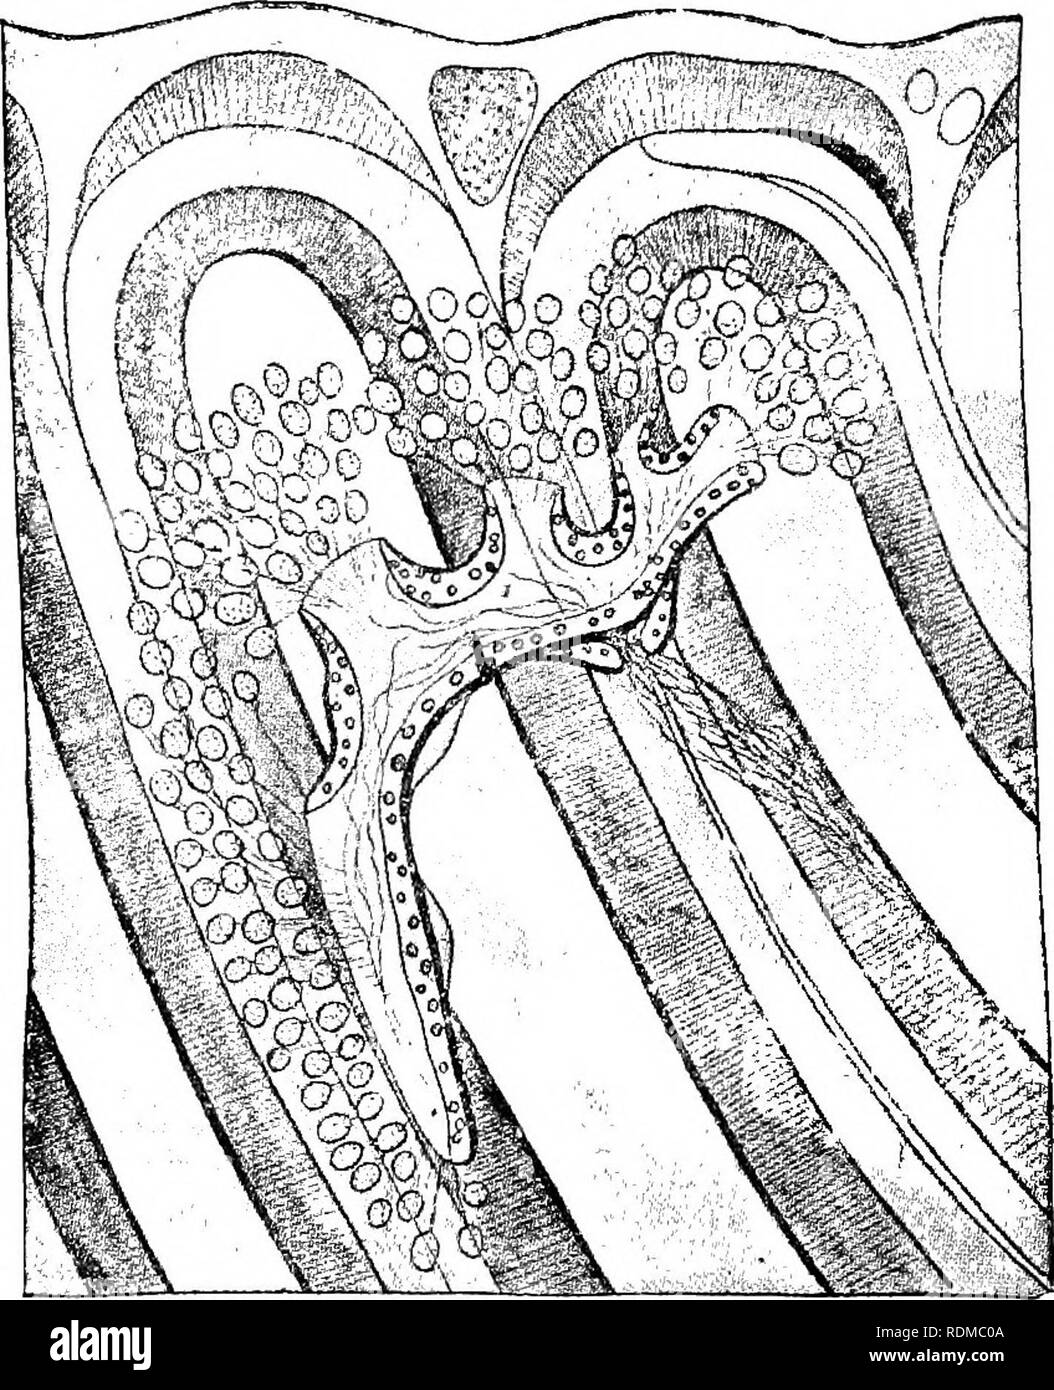 . The Cambridge natural history. Zoology. 126 CEPHALOCHORDATA CHAP. pharynx (Fig. 71, hr.f). There are, however, a large number (about 100 pairs) of minute nephriclia, discovered (1890) by Weiss and by Boveri independently, lying at the sides of the dorsal coelomic canals above the pharynx, which must be regarded as the chief functional renal organs. These are bent tubules, partly glandular and partly ciliated, each giving off several caecal. Fig. 7S.—Branchiostoma lanceolatum. A nephridium of the left side with part of tlio wall of the pharynx, as seen alive, highly magnified. (From Willey, a Stock Photo